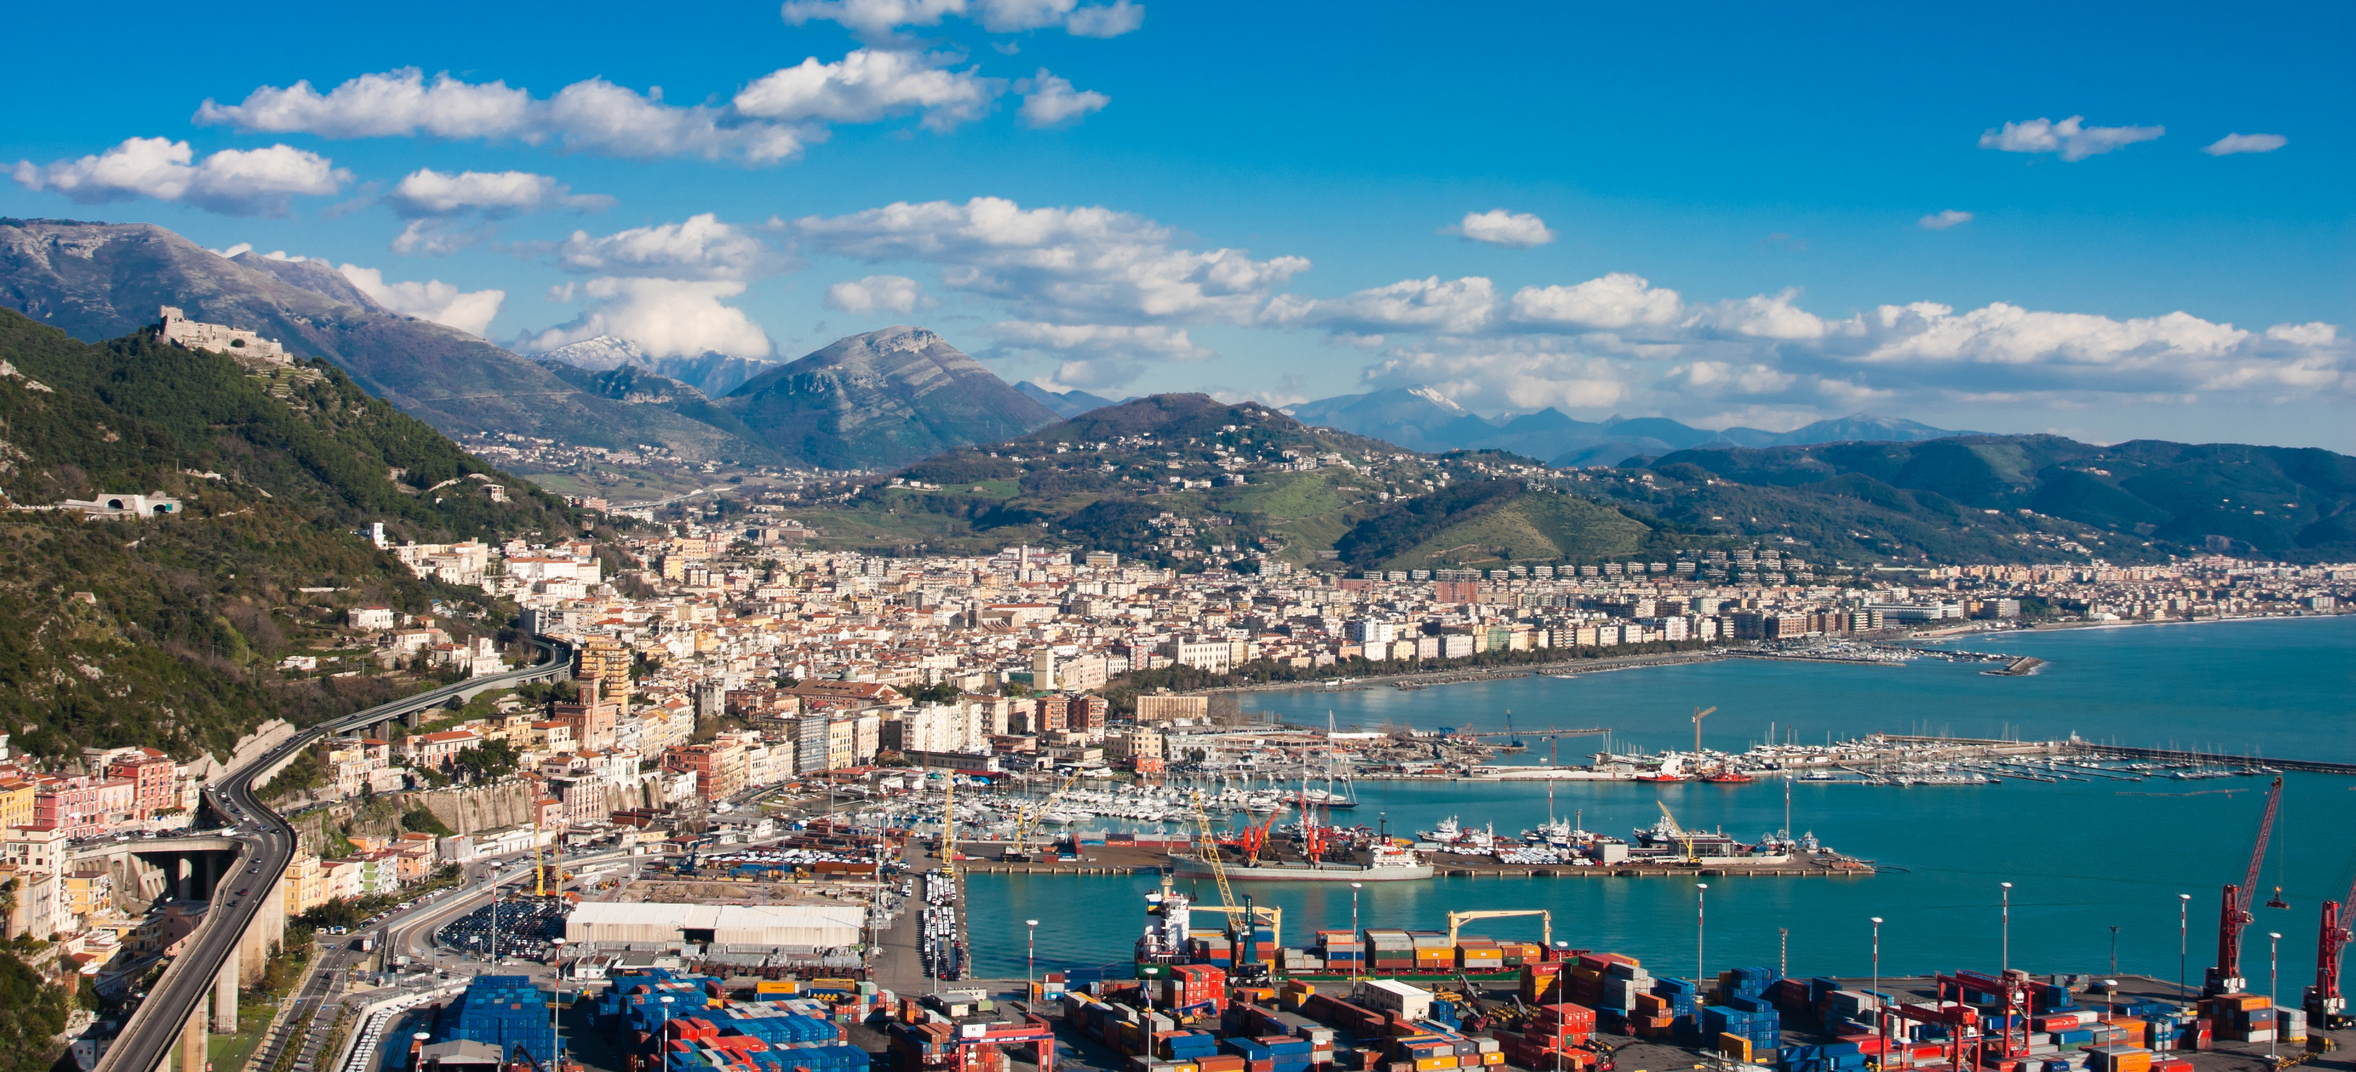 Landscape of the city of Salerno in Italy